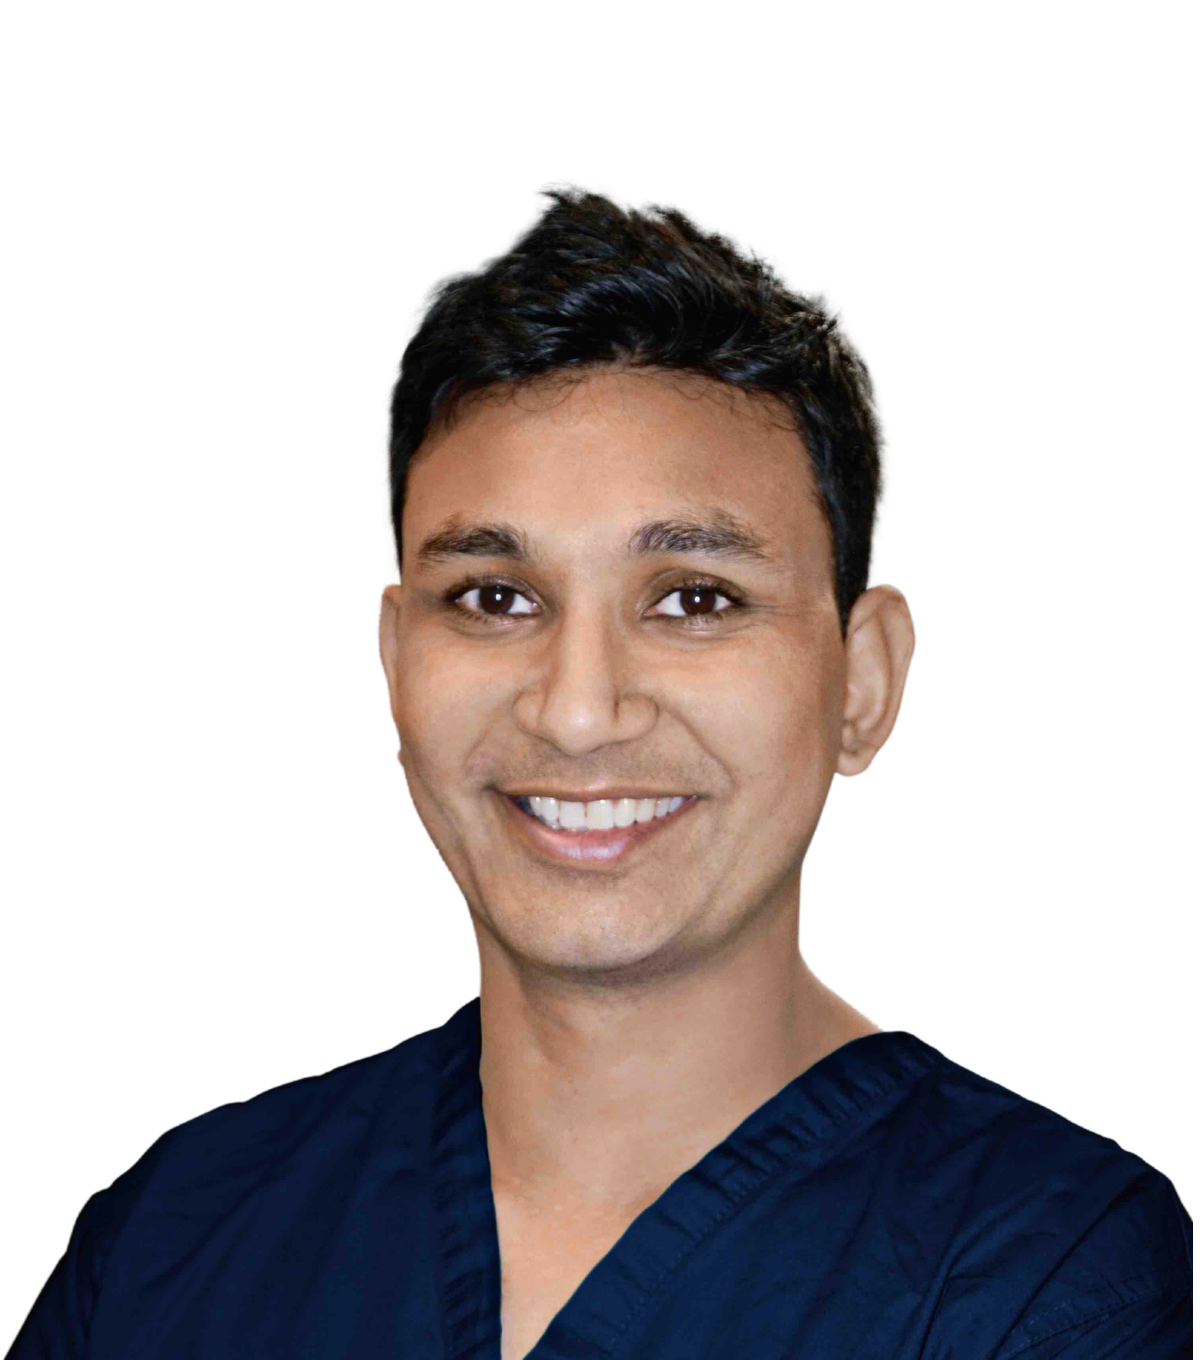 Mr Pavi Agrawal, Consultant Ophthalmic Surgeon